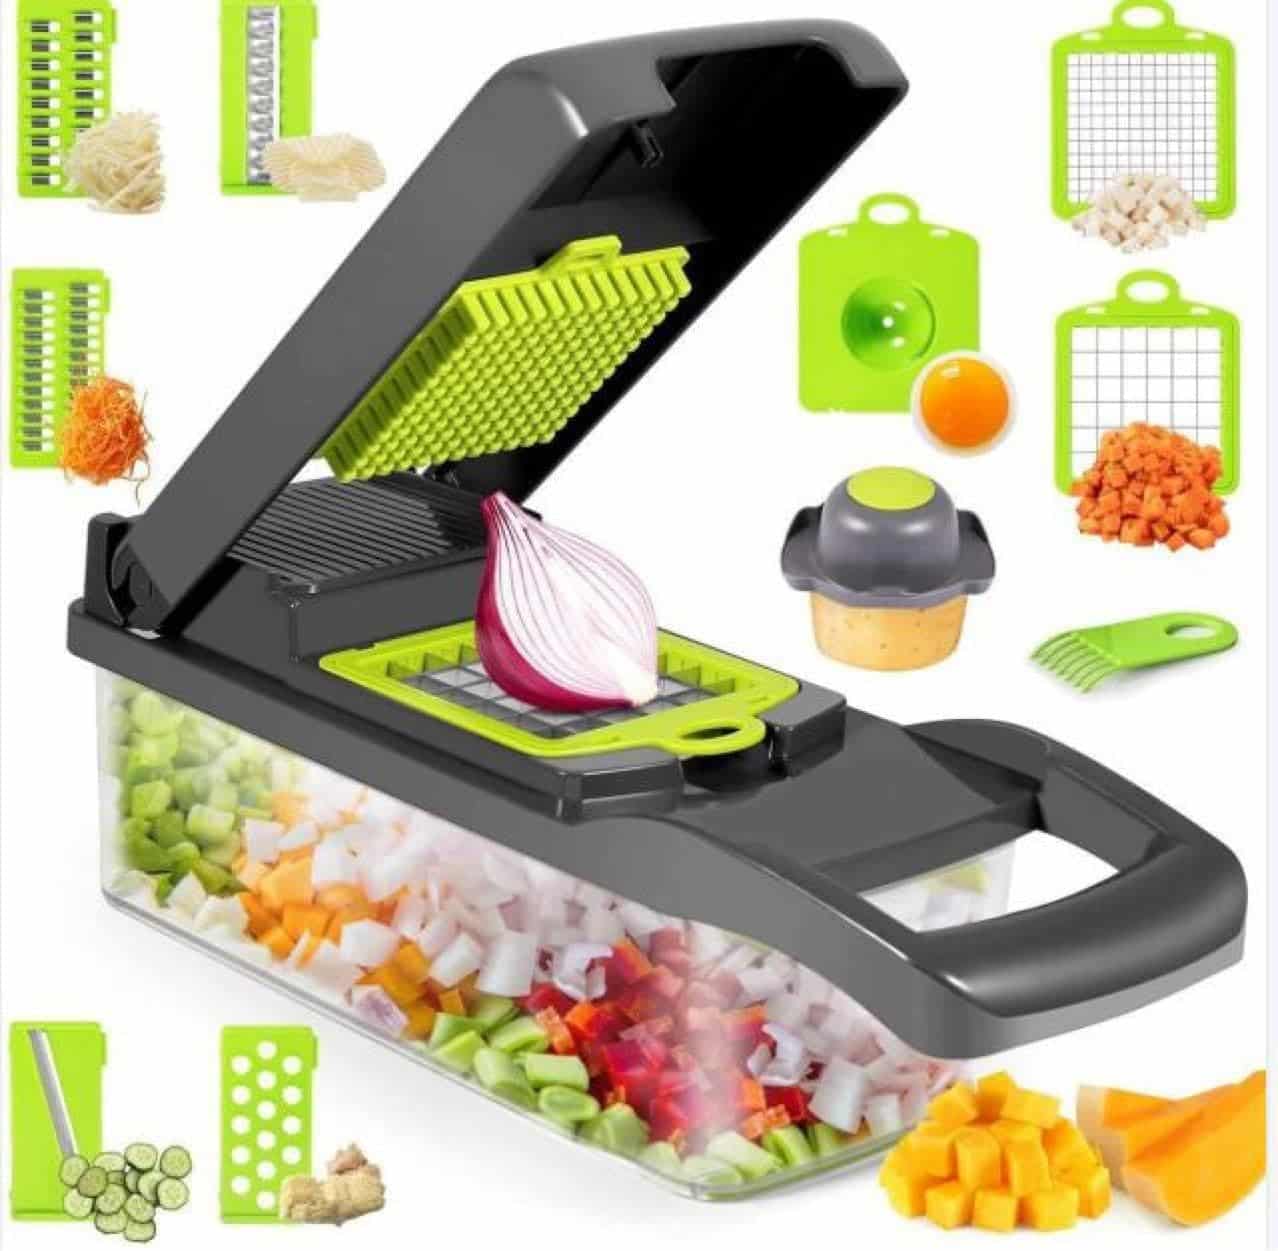 The Ultimate Kitchen Gadget: 12-in-1 Small Kitchen Vegetable Chopper Review